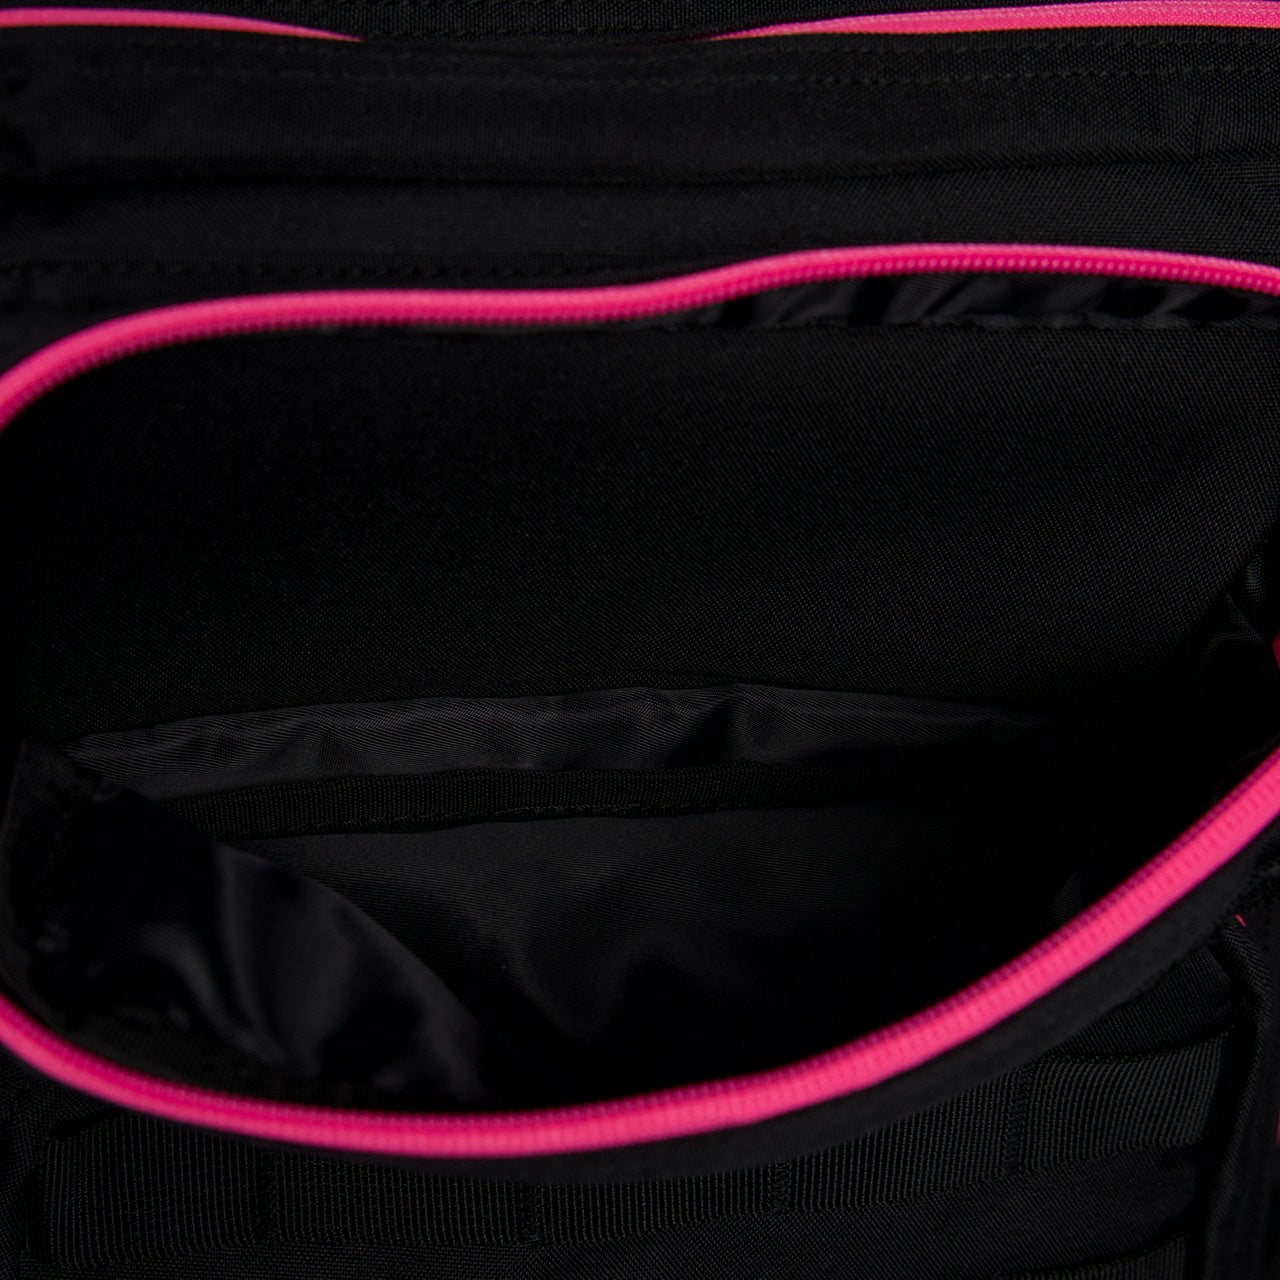 25L Backpack Pink Neon